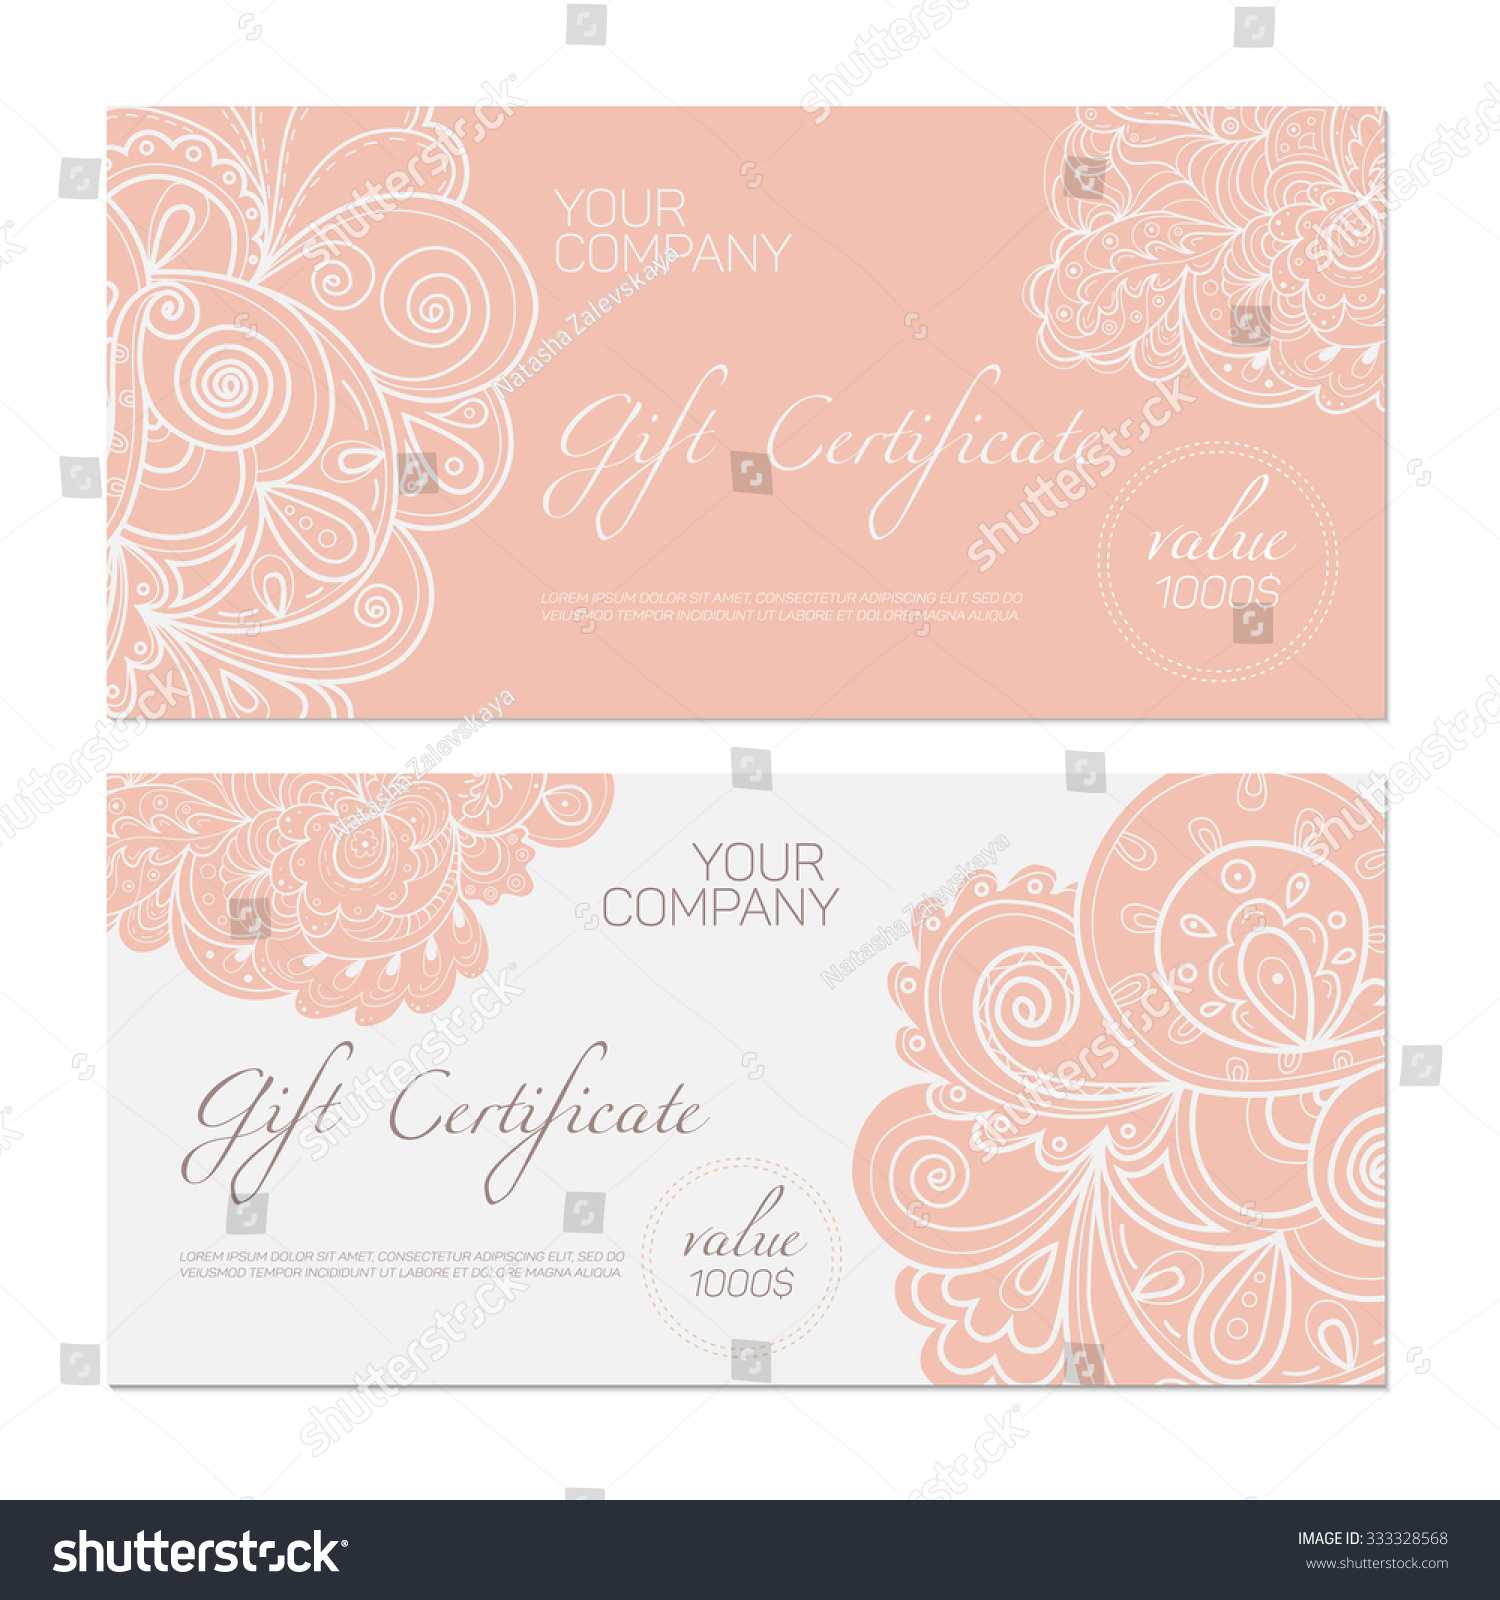 Elegant Gift Certificate Template Abstract Ornamental For Elegant Gift Certificate Template